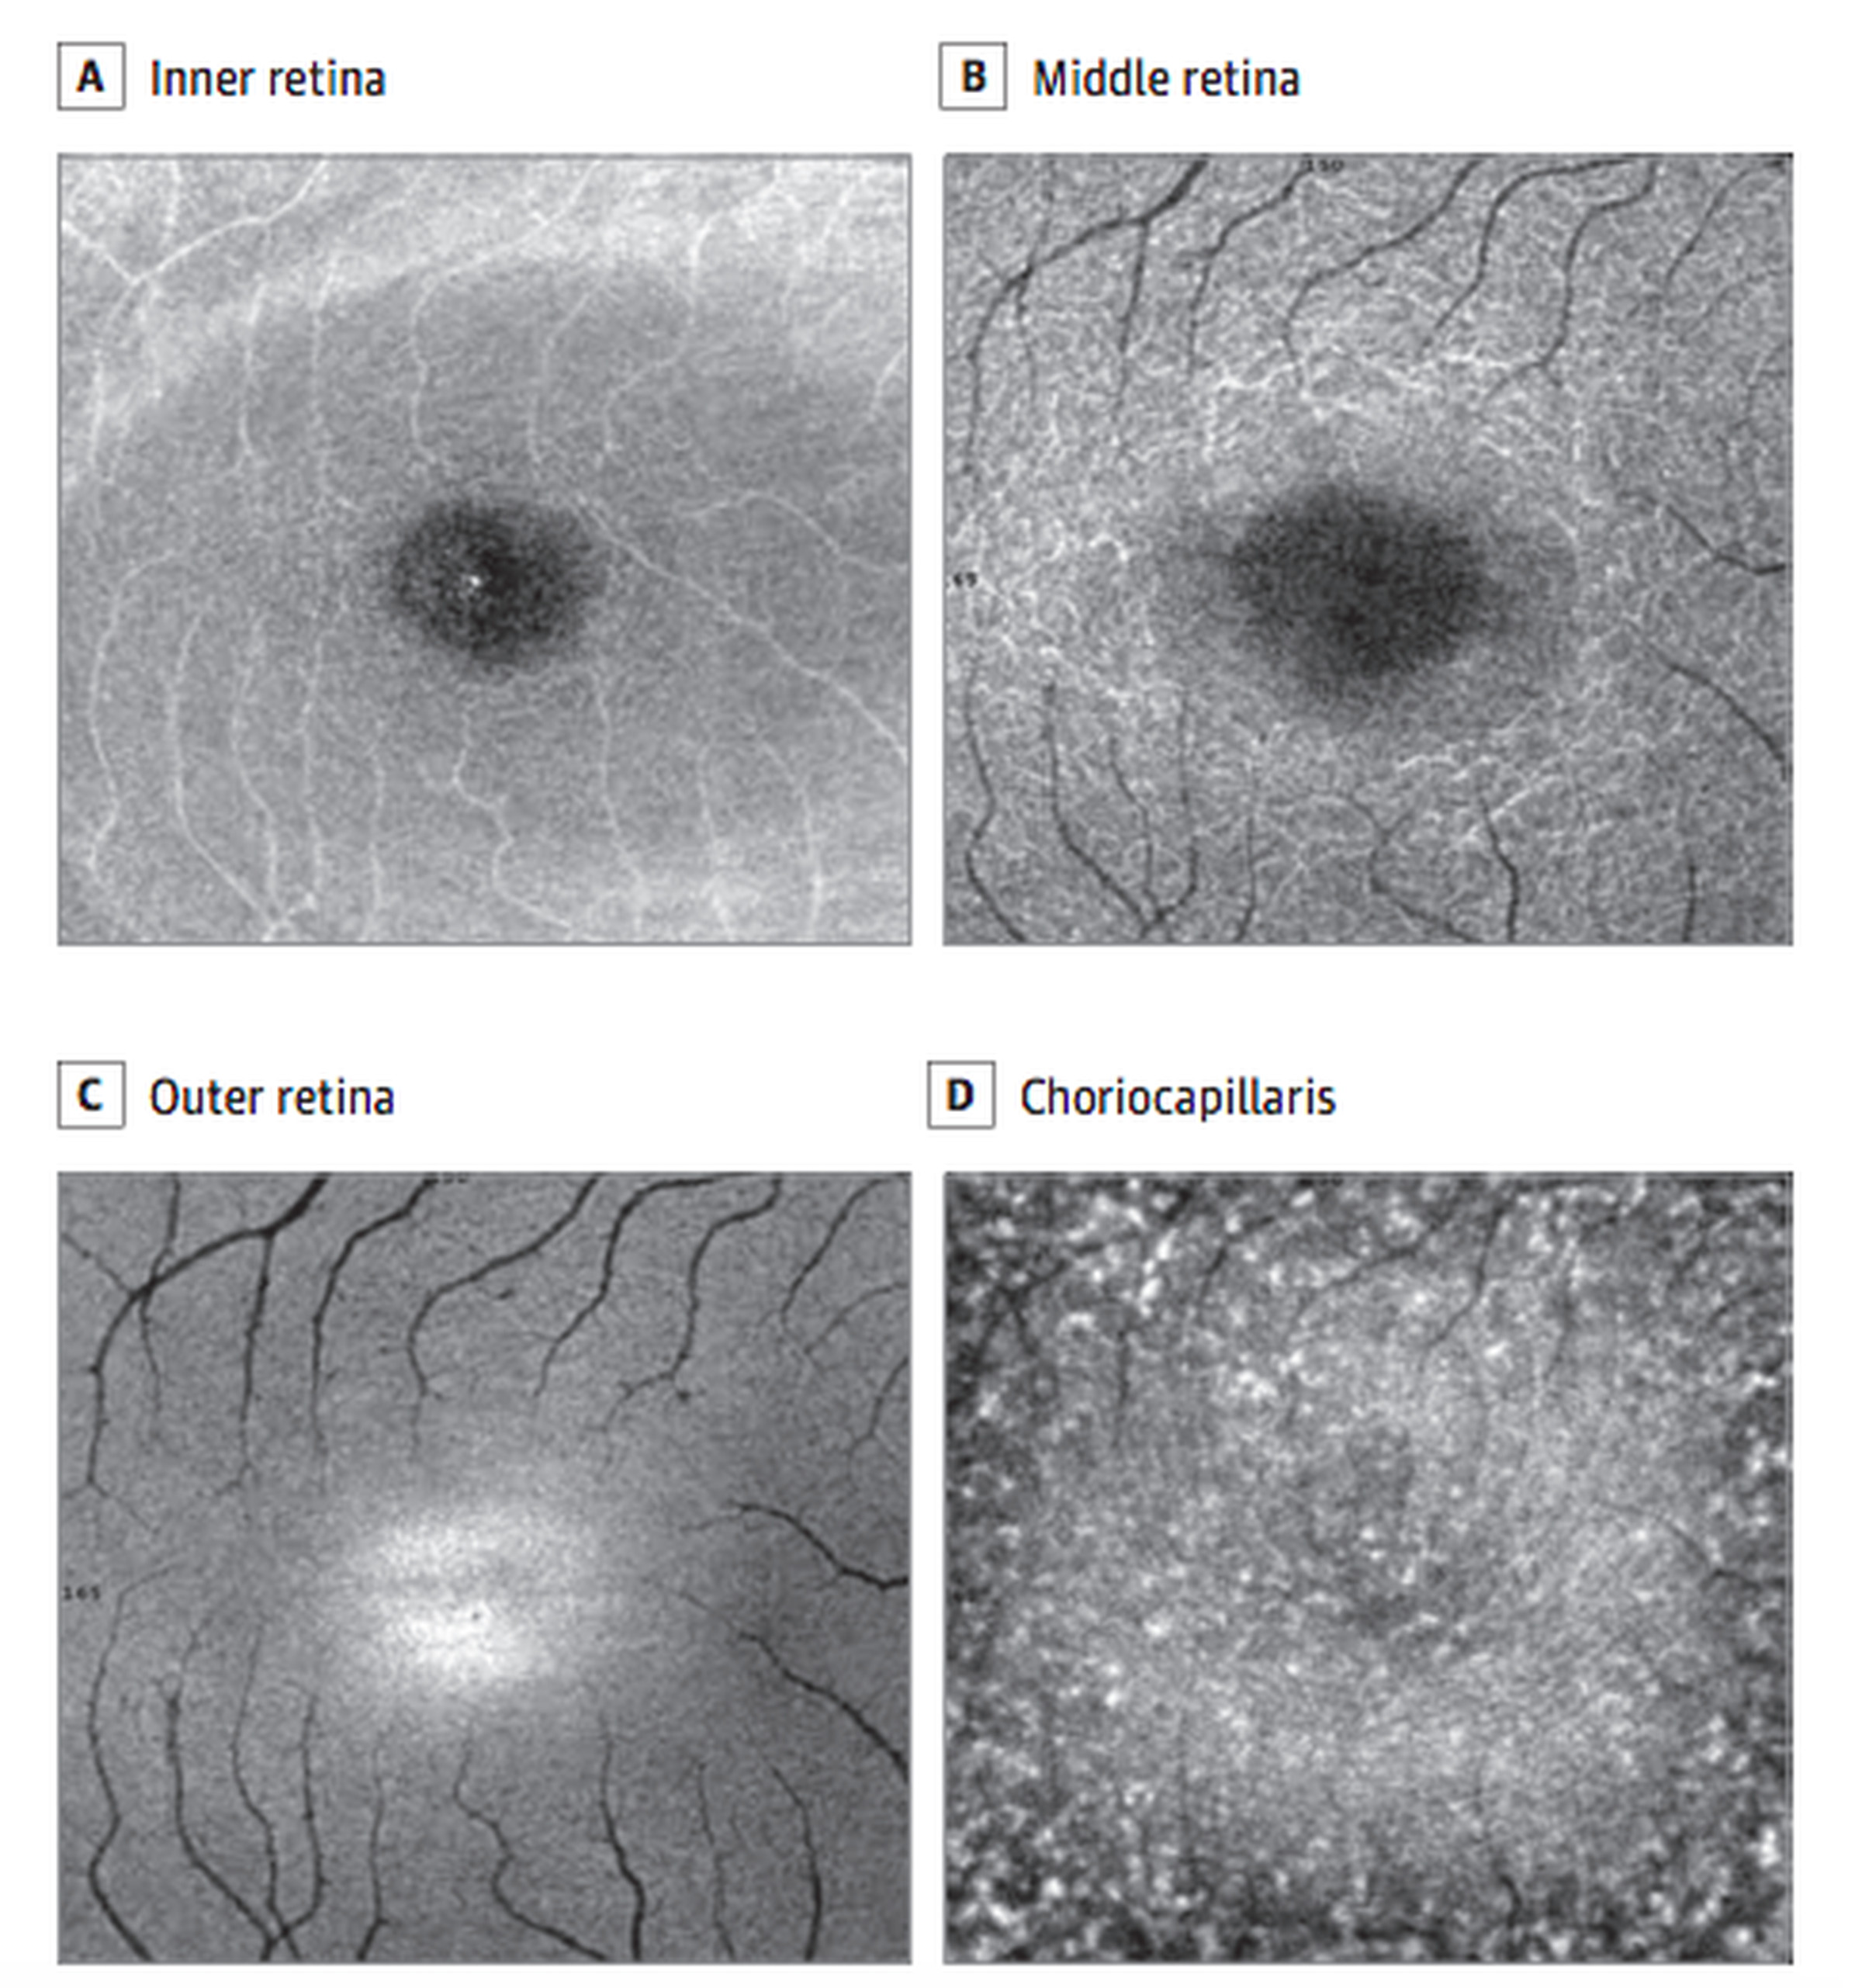 Images of eye damage after staring at the sun.